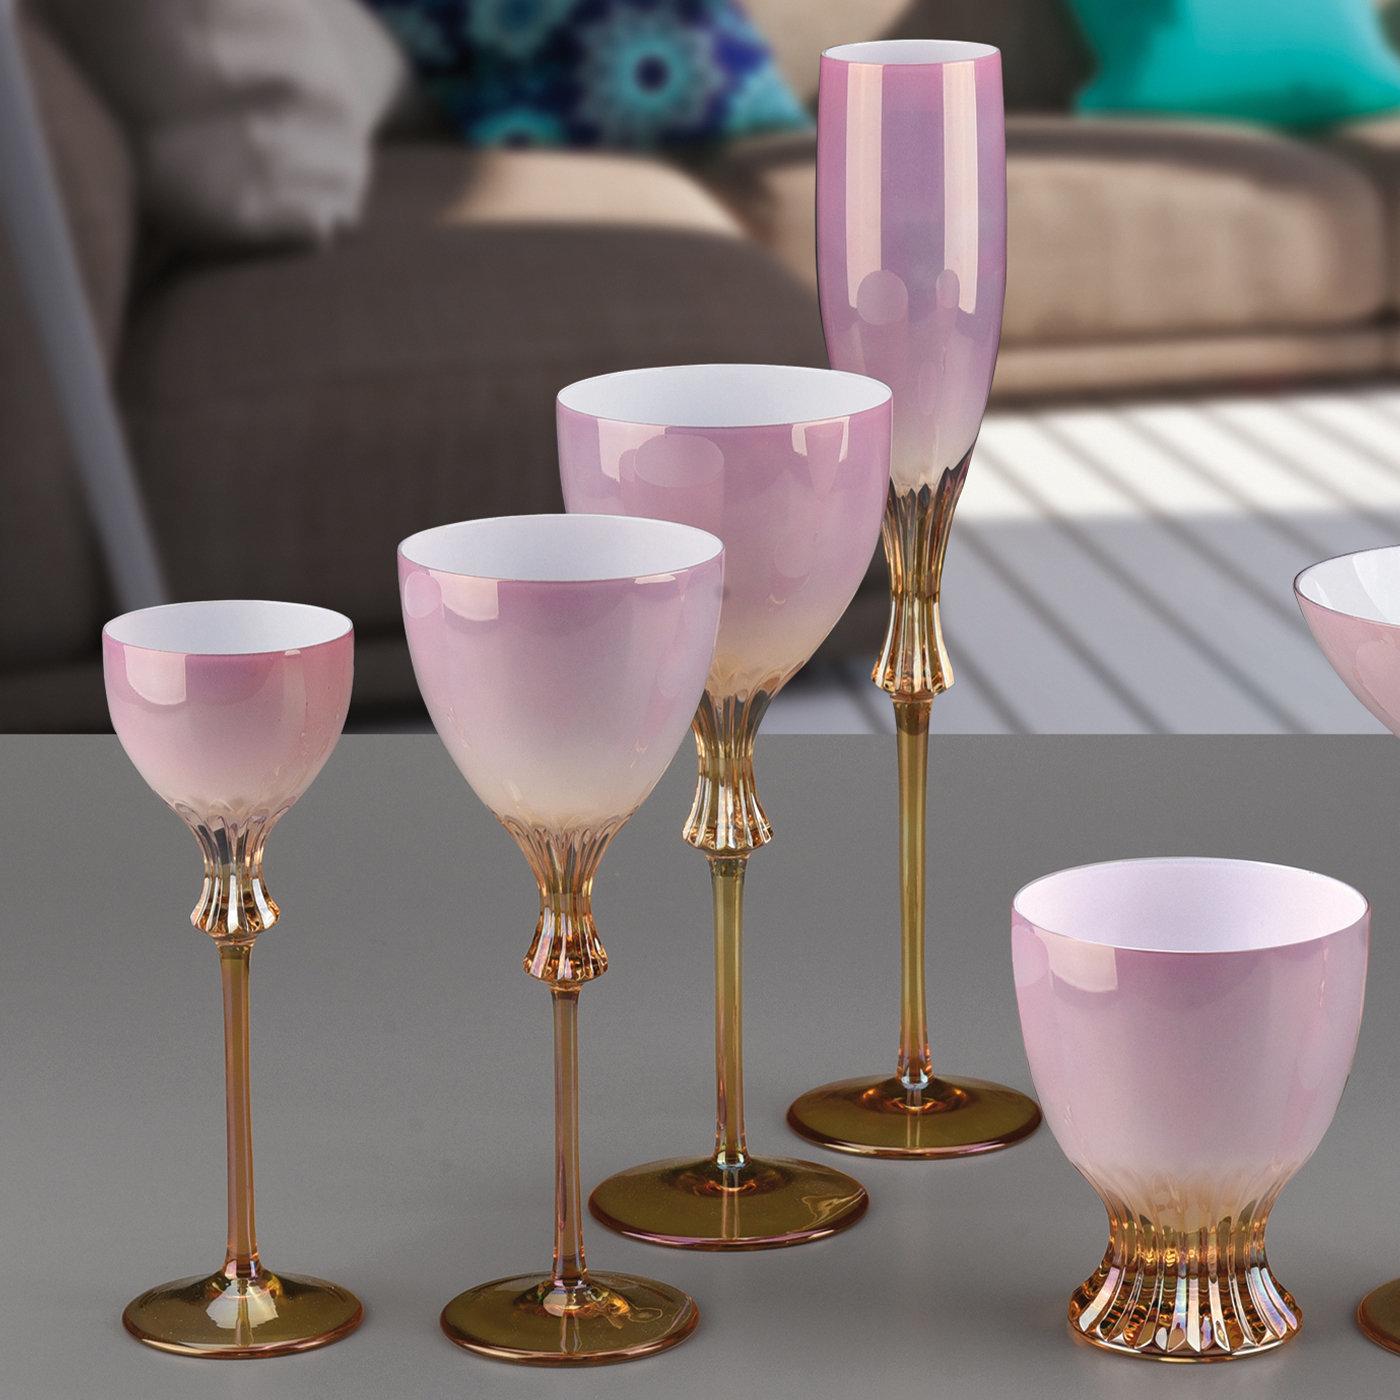 This sleek set features two water glasses, two wine glasses, and two flutes to add a lavish and graceful romantic accent to an elegant dining table. Showcasing mesmerizing pink hues fading to an amber-colored stem and base, each piece is deftly